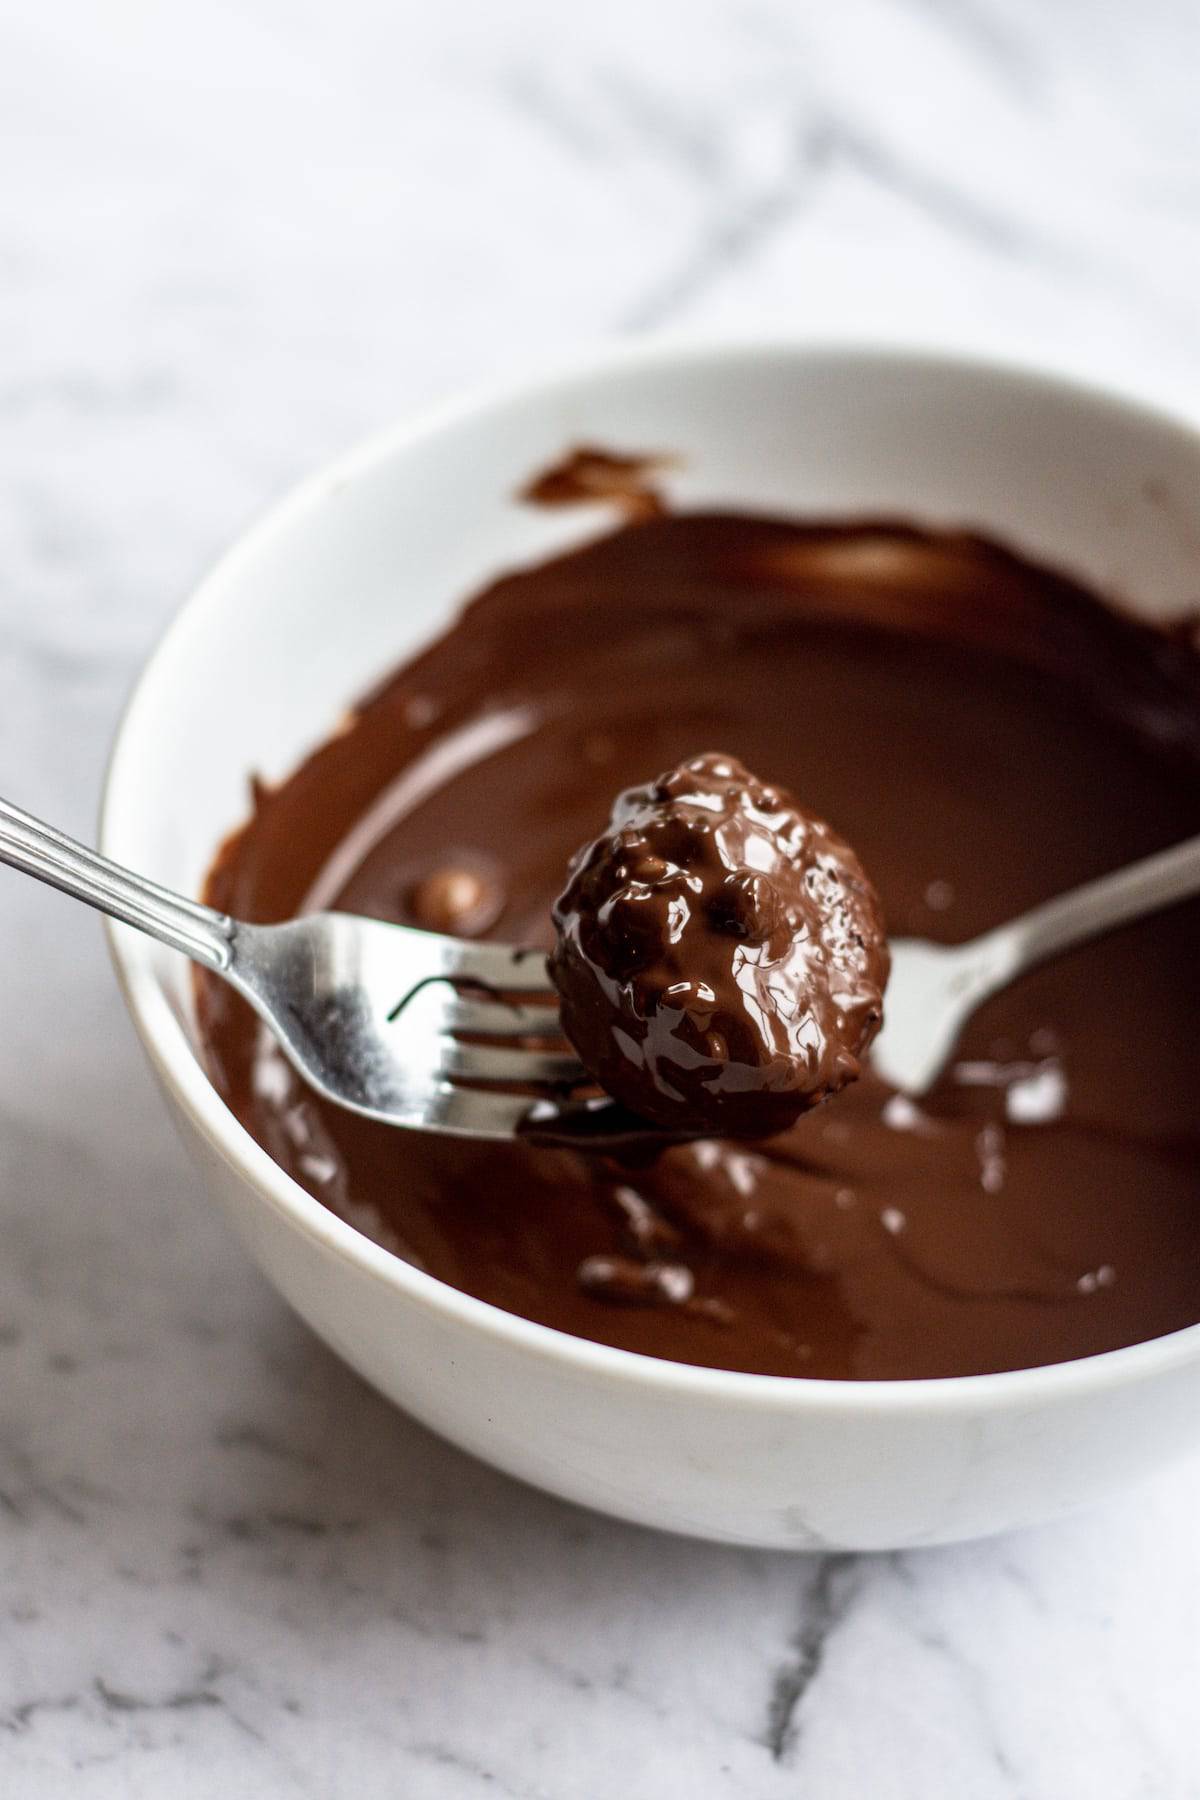 a chocolate covered truffle on a fork